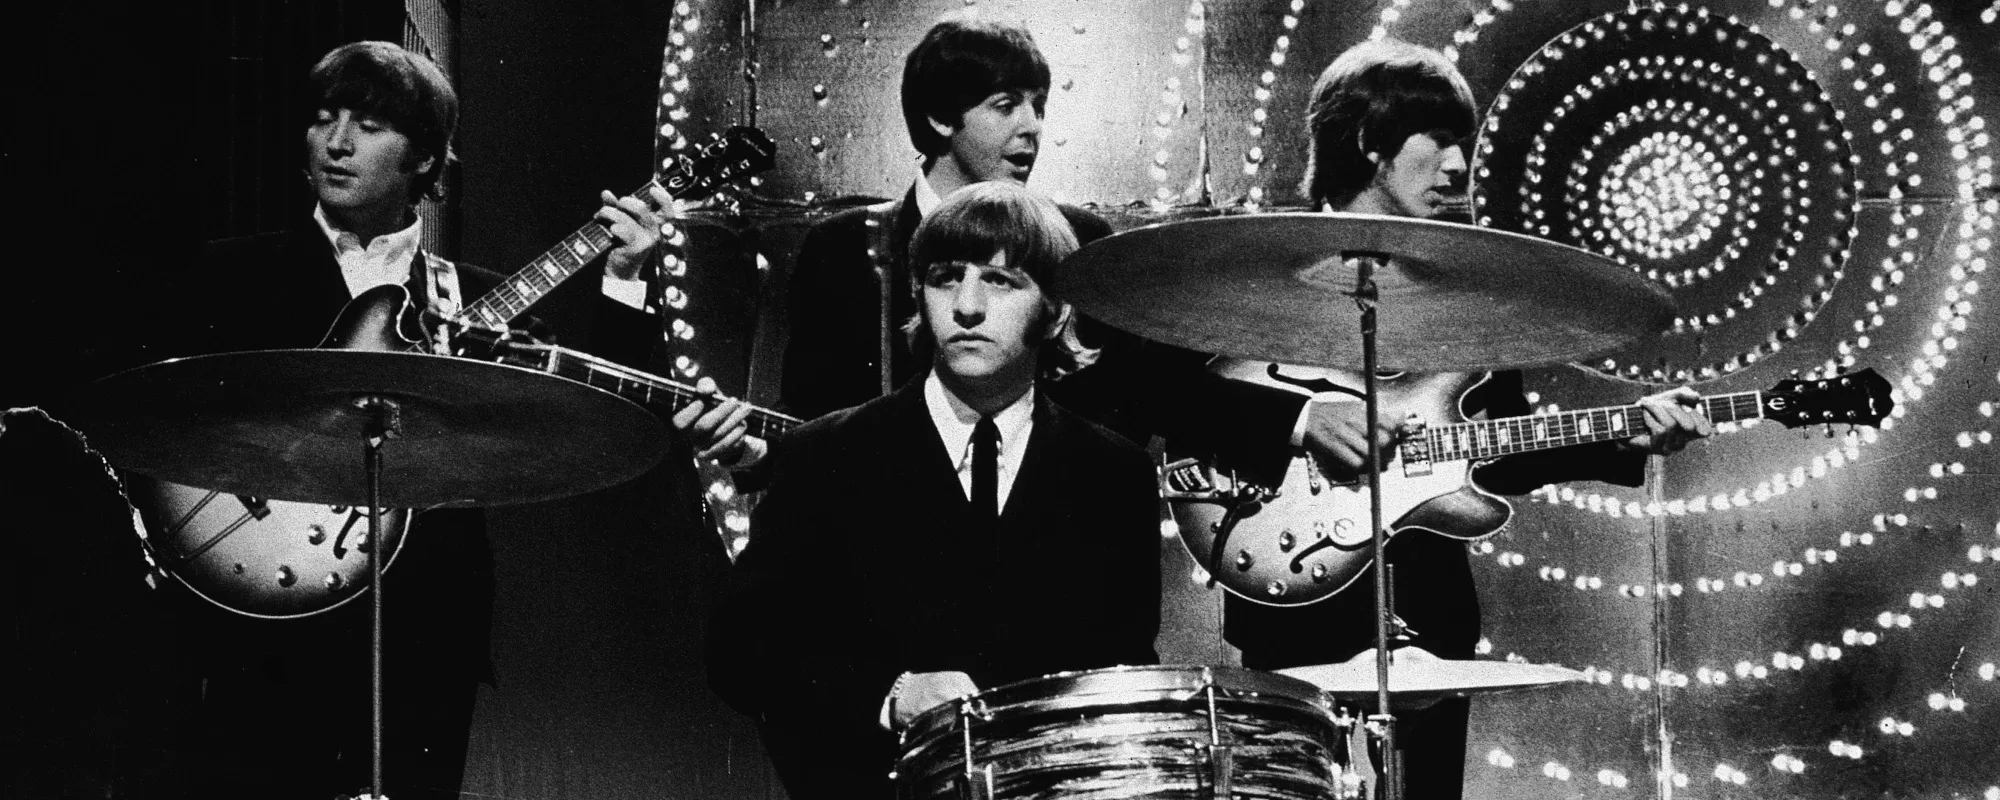 “The Whole Thing Came Out in One Gulp”: The Story Behind “Nowhere Man” by The Beatles